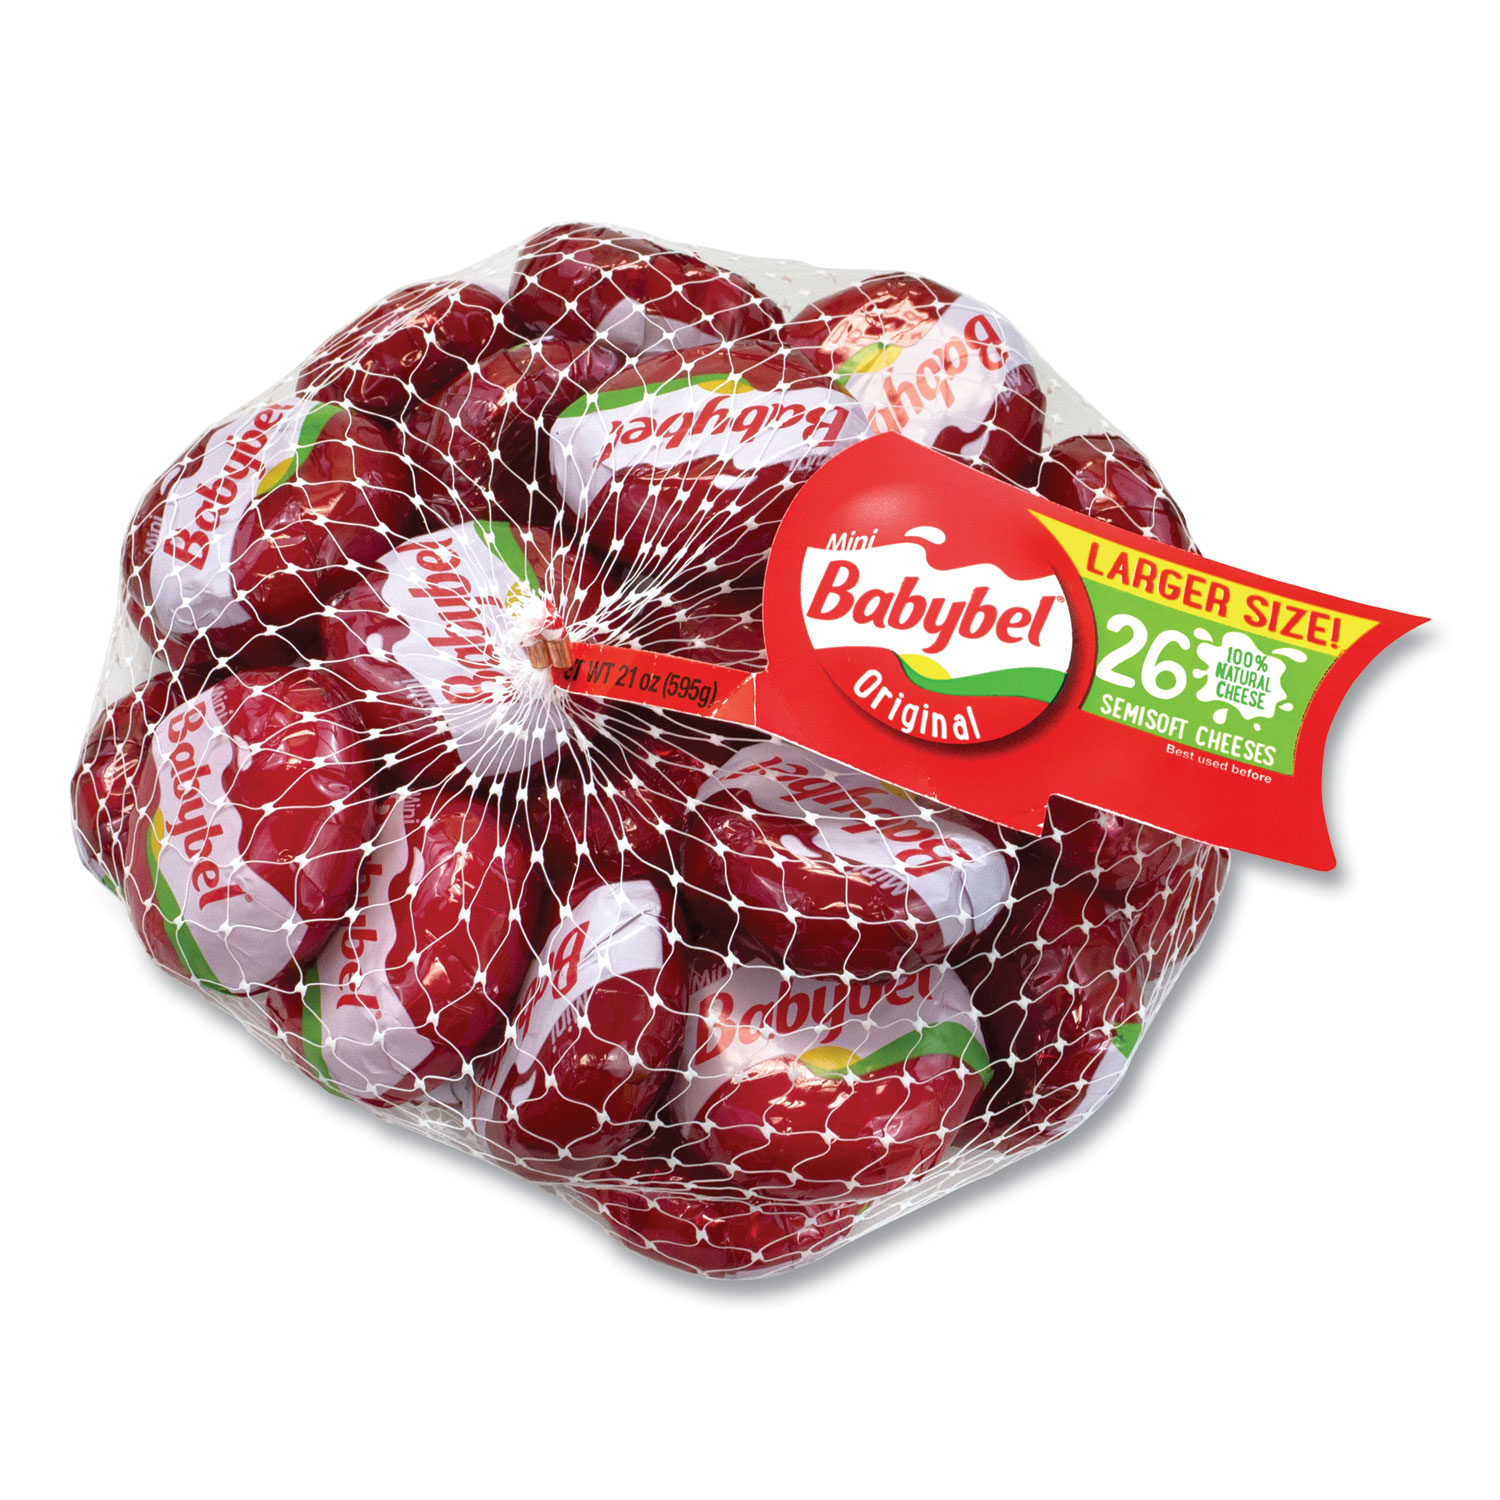 Mini Babybel® Cheese Wheels, Original, 21 oz Bag, 26 Wheels/Bag, Free Delivery in 1-4 Business Days